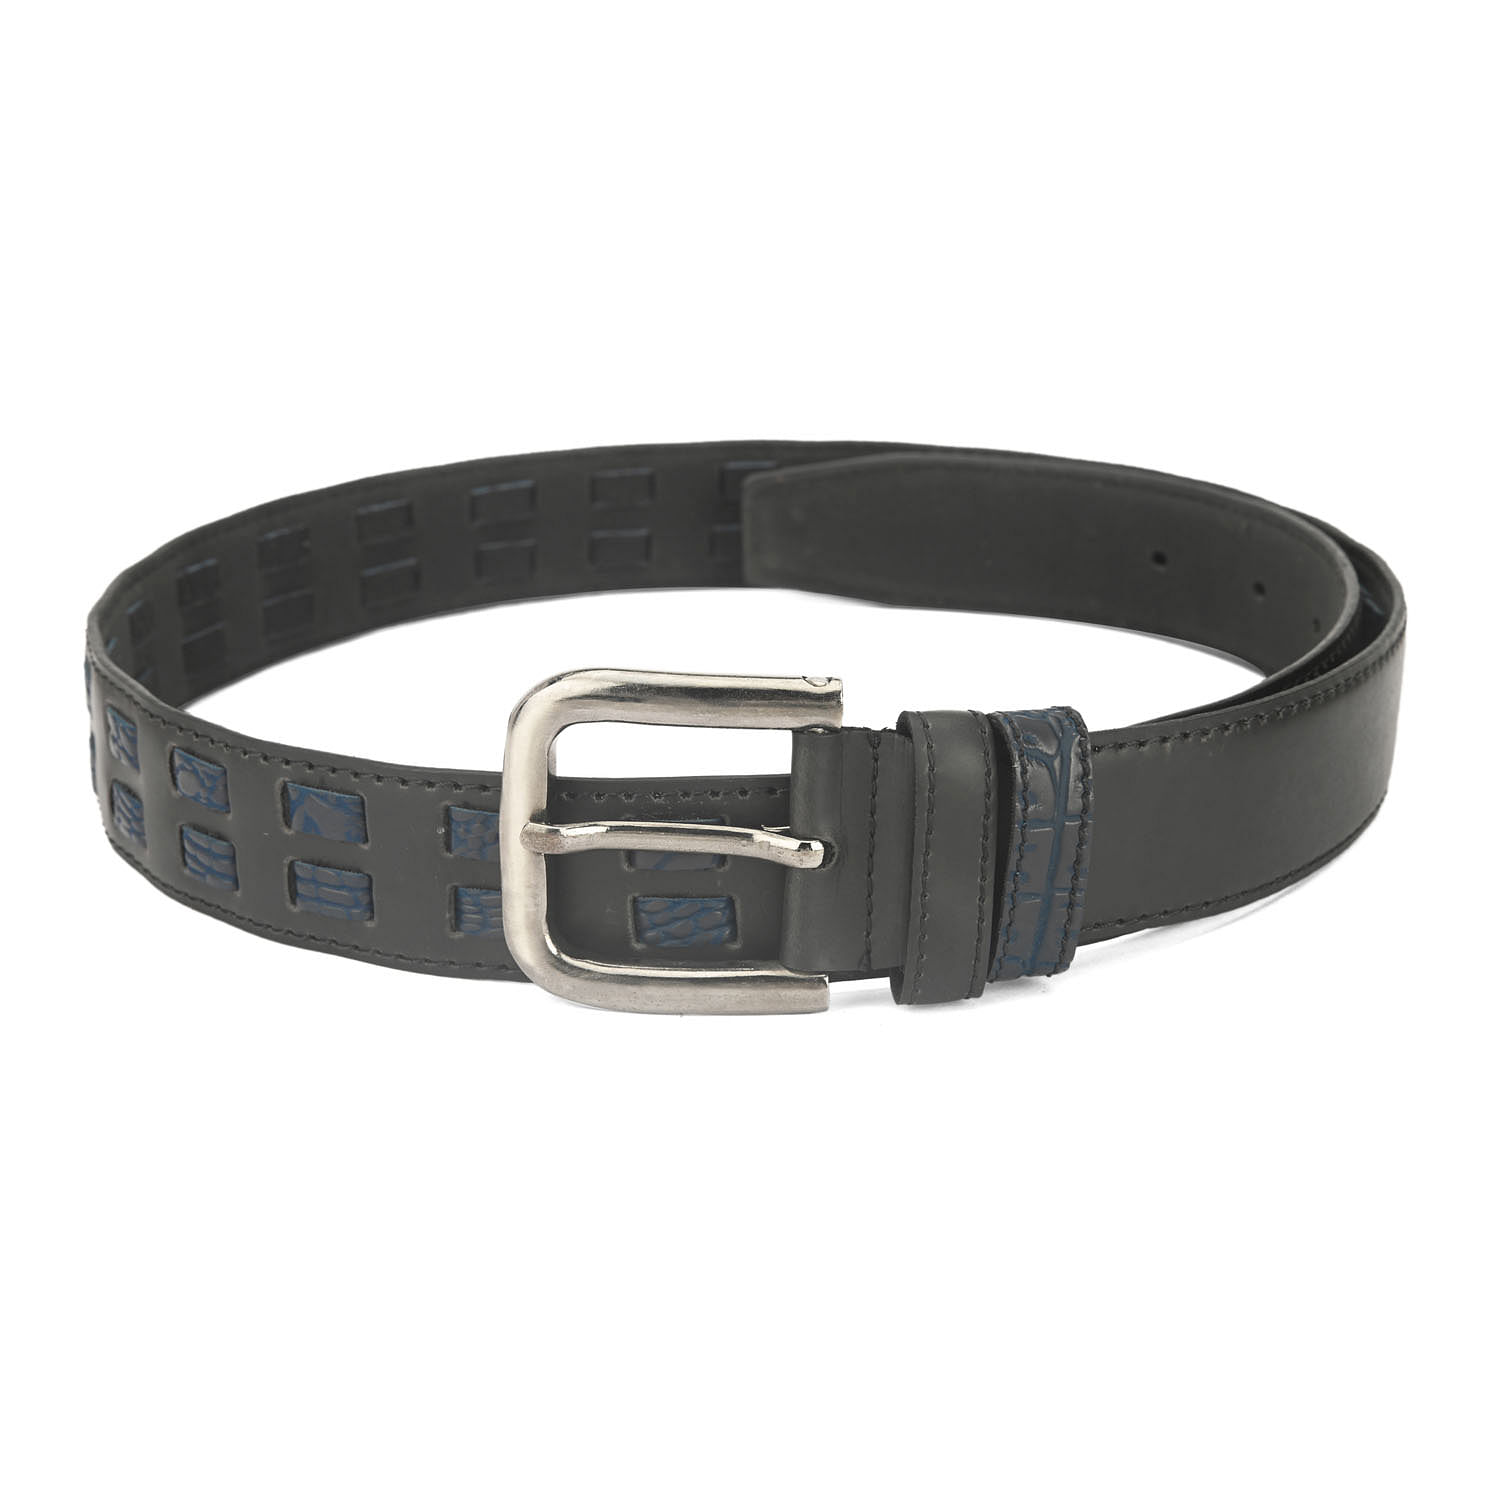 Men's Casual Textured Perforated Belt Black - LZ-CB-102